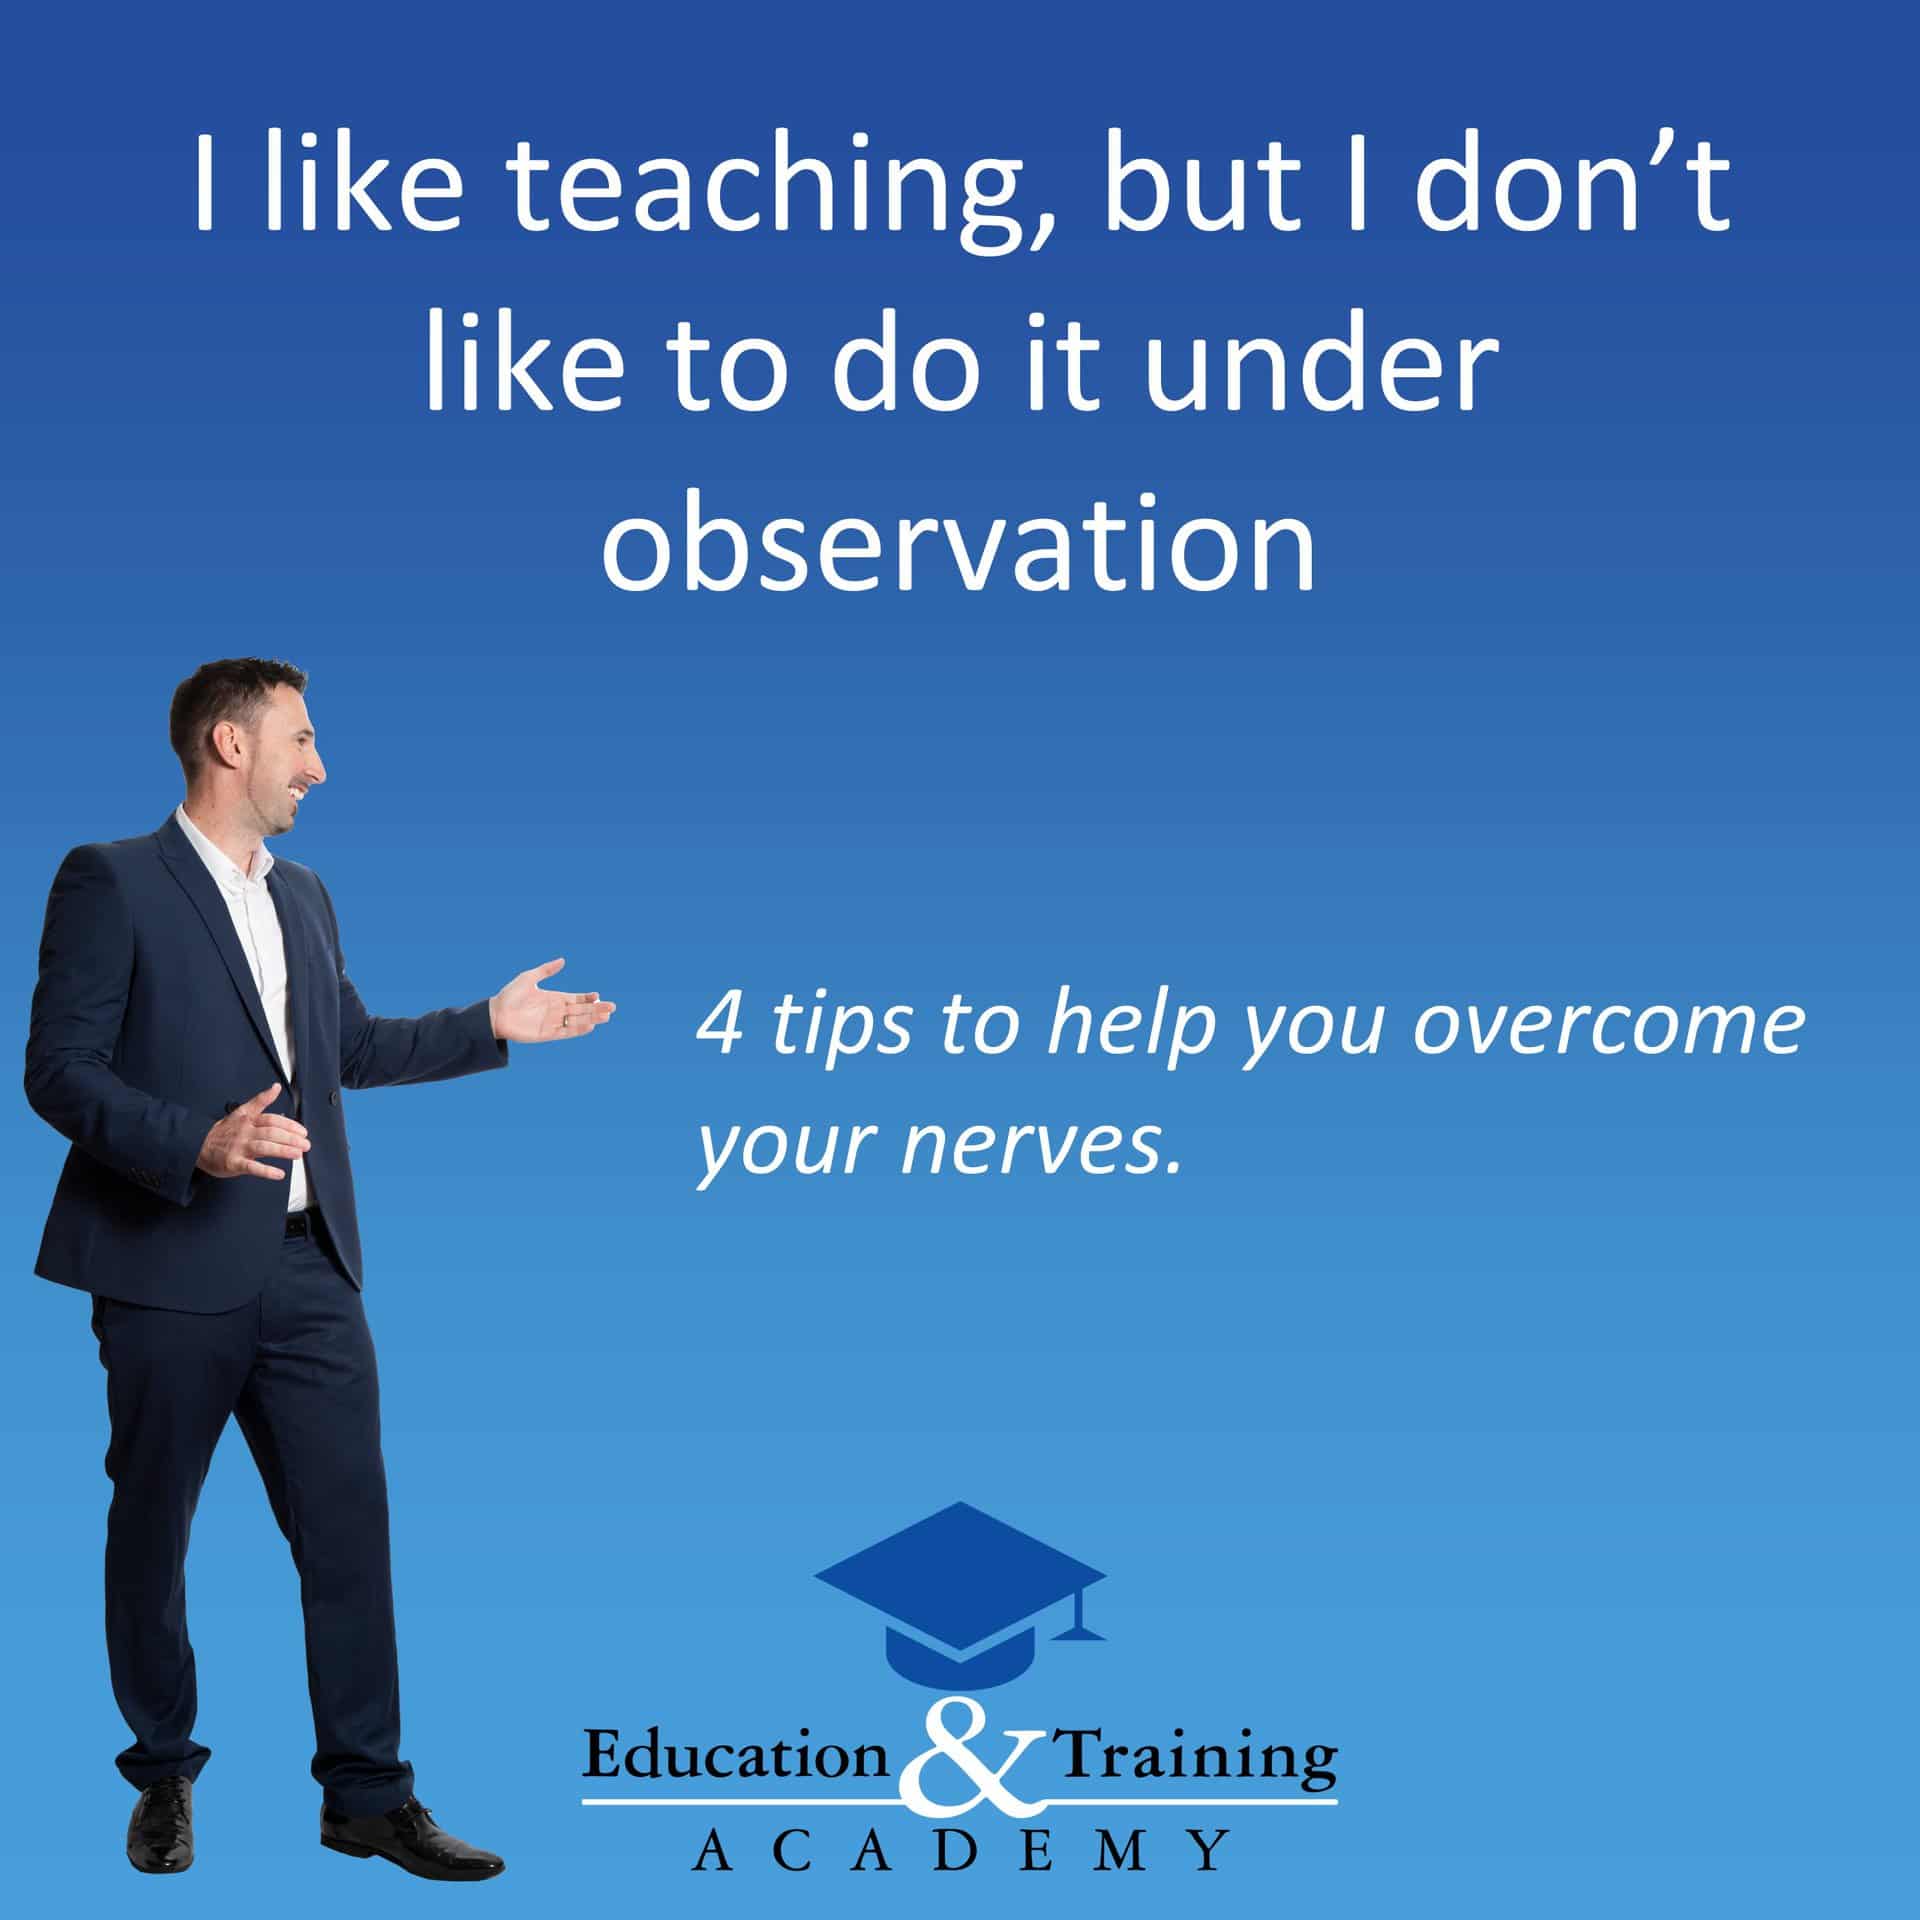 i like teaching but not observations